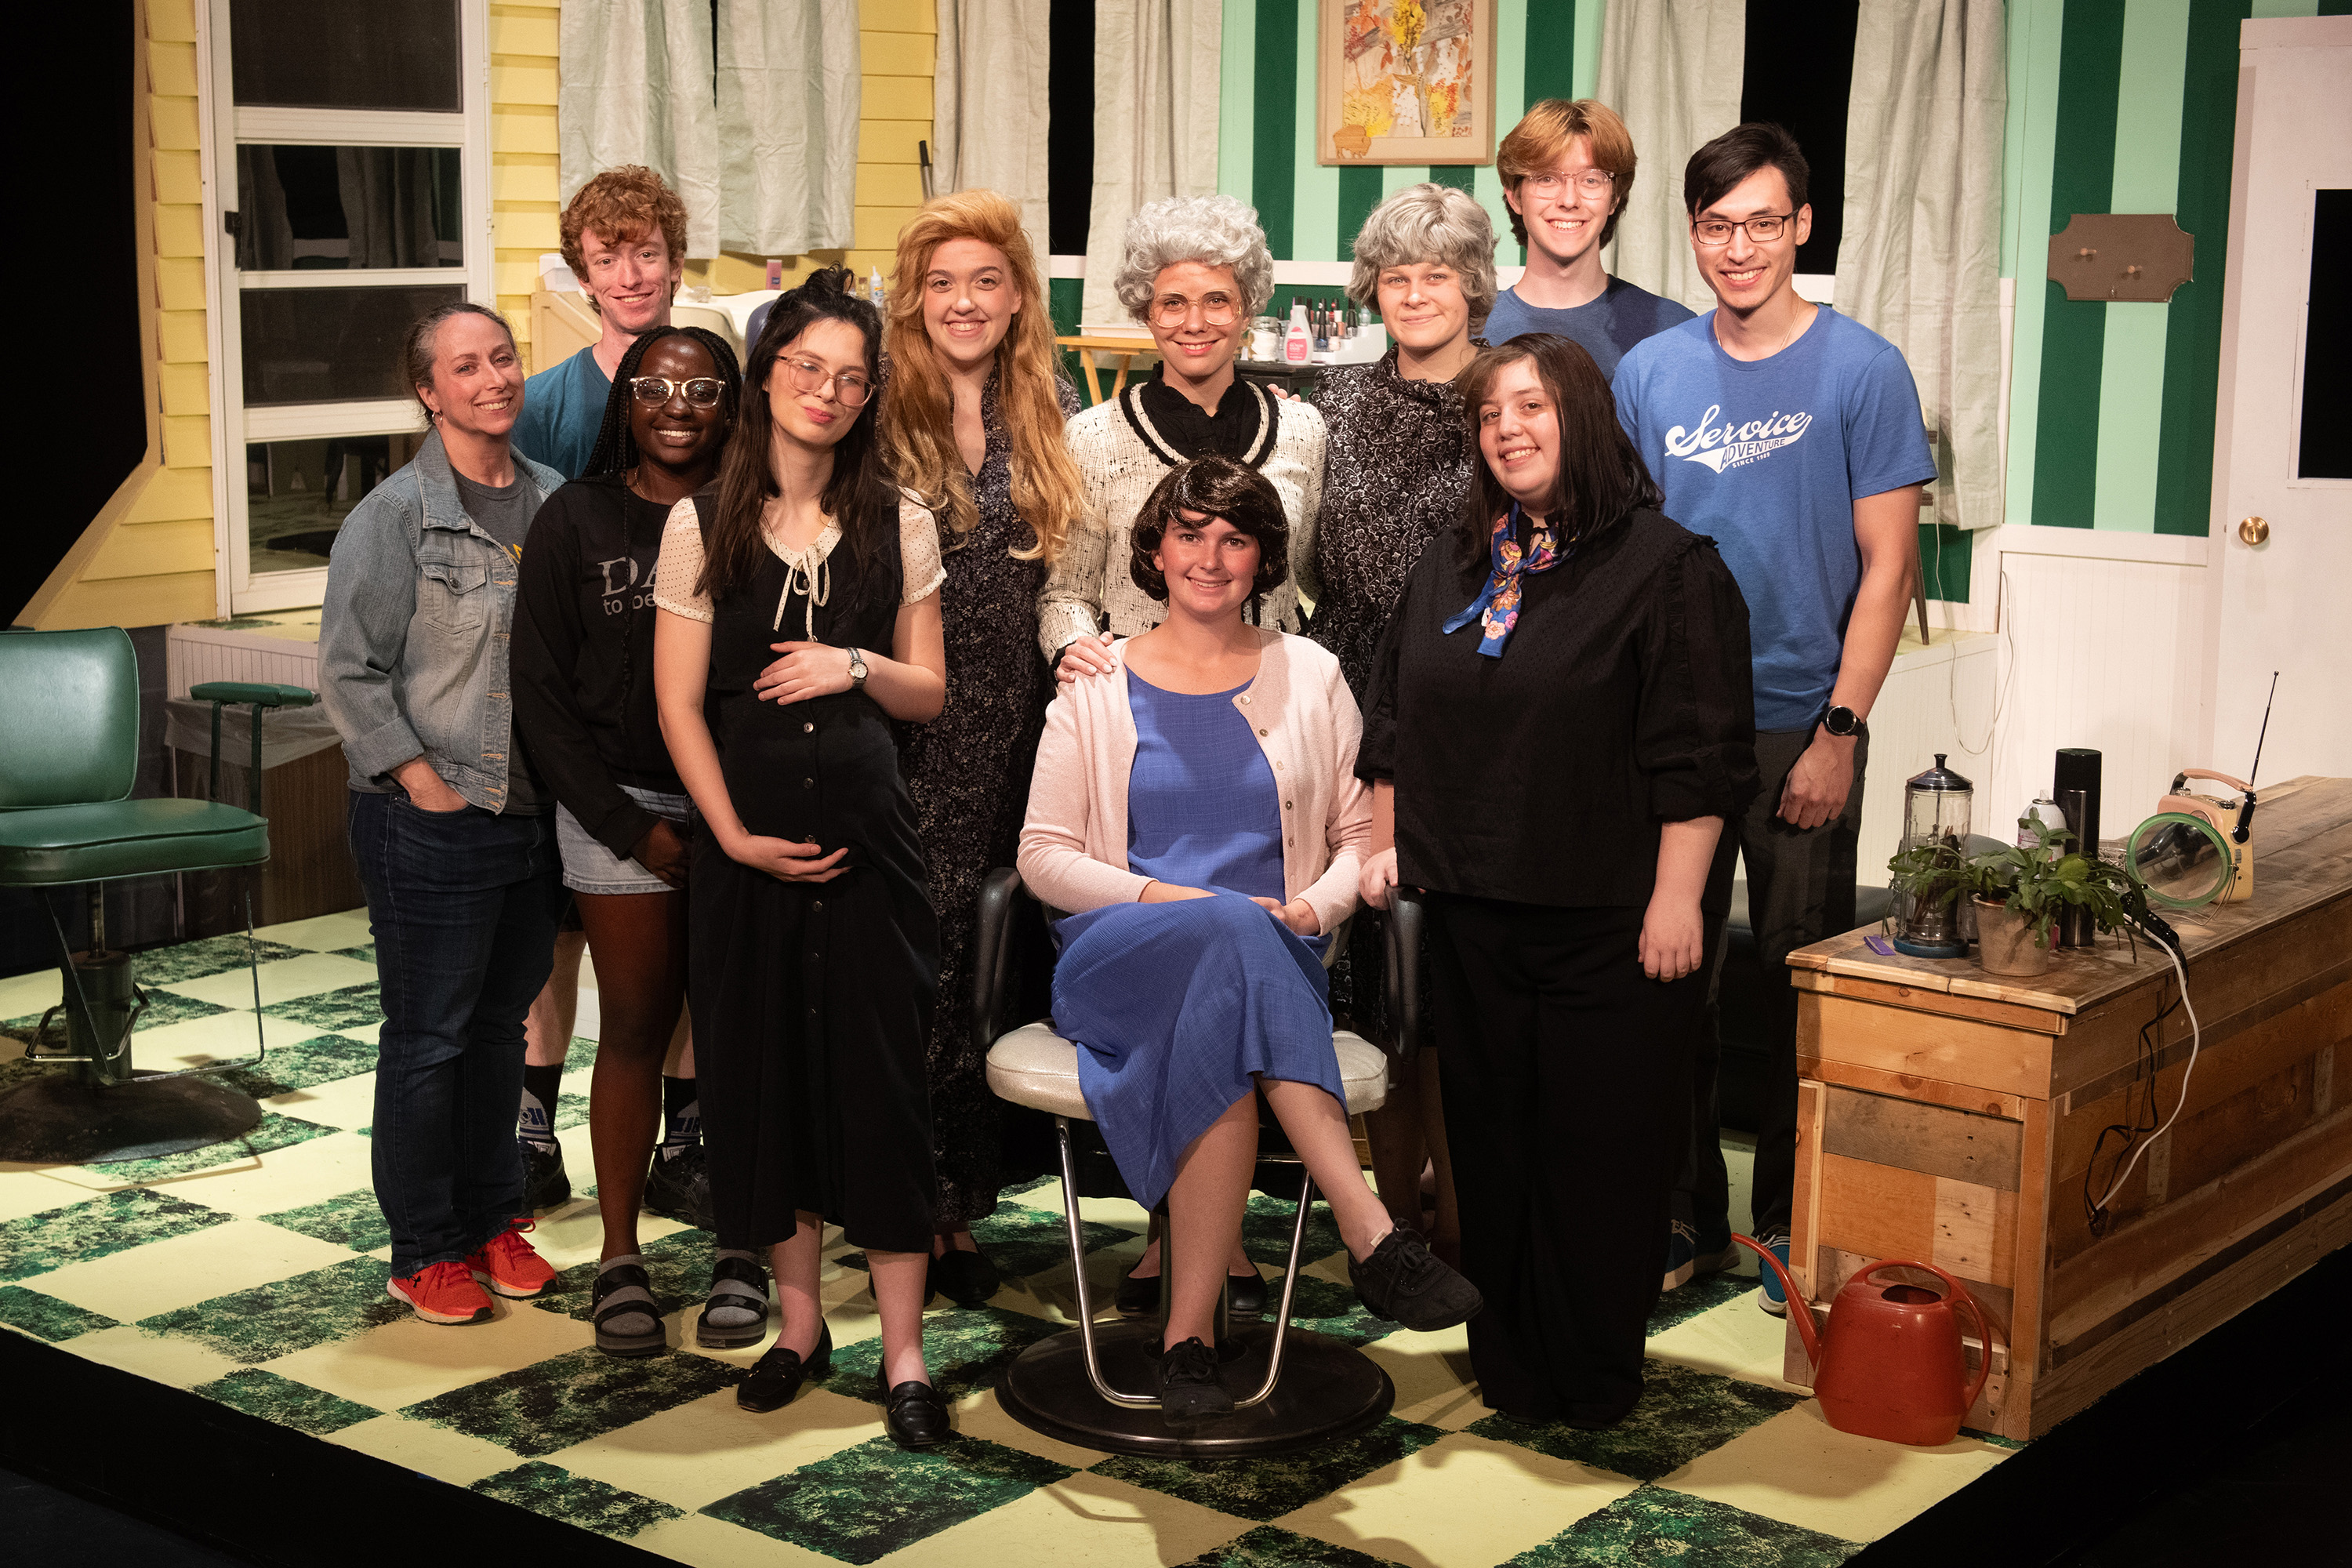 cast and crew photo from Hesston College Theatre fall 2023 show "Steel Magnolias"